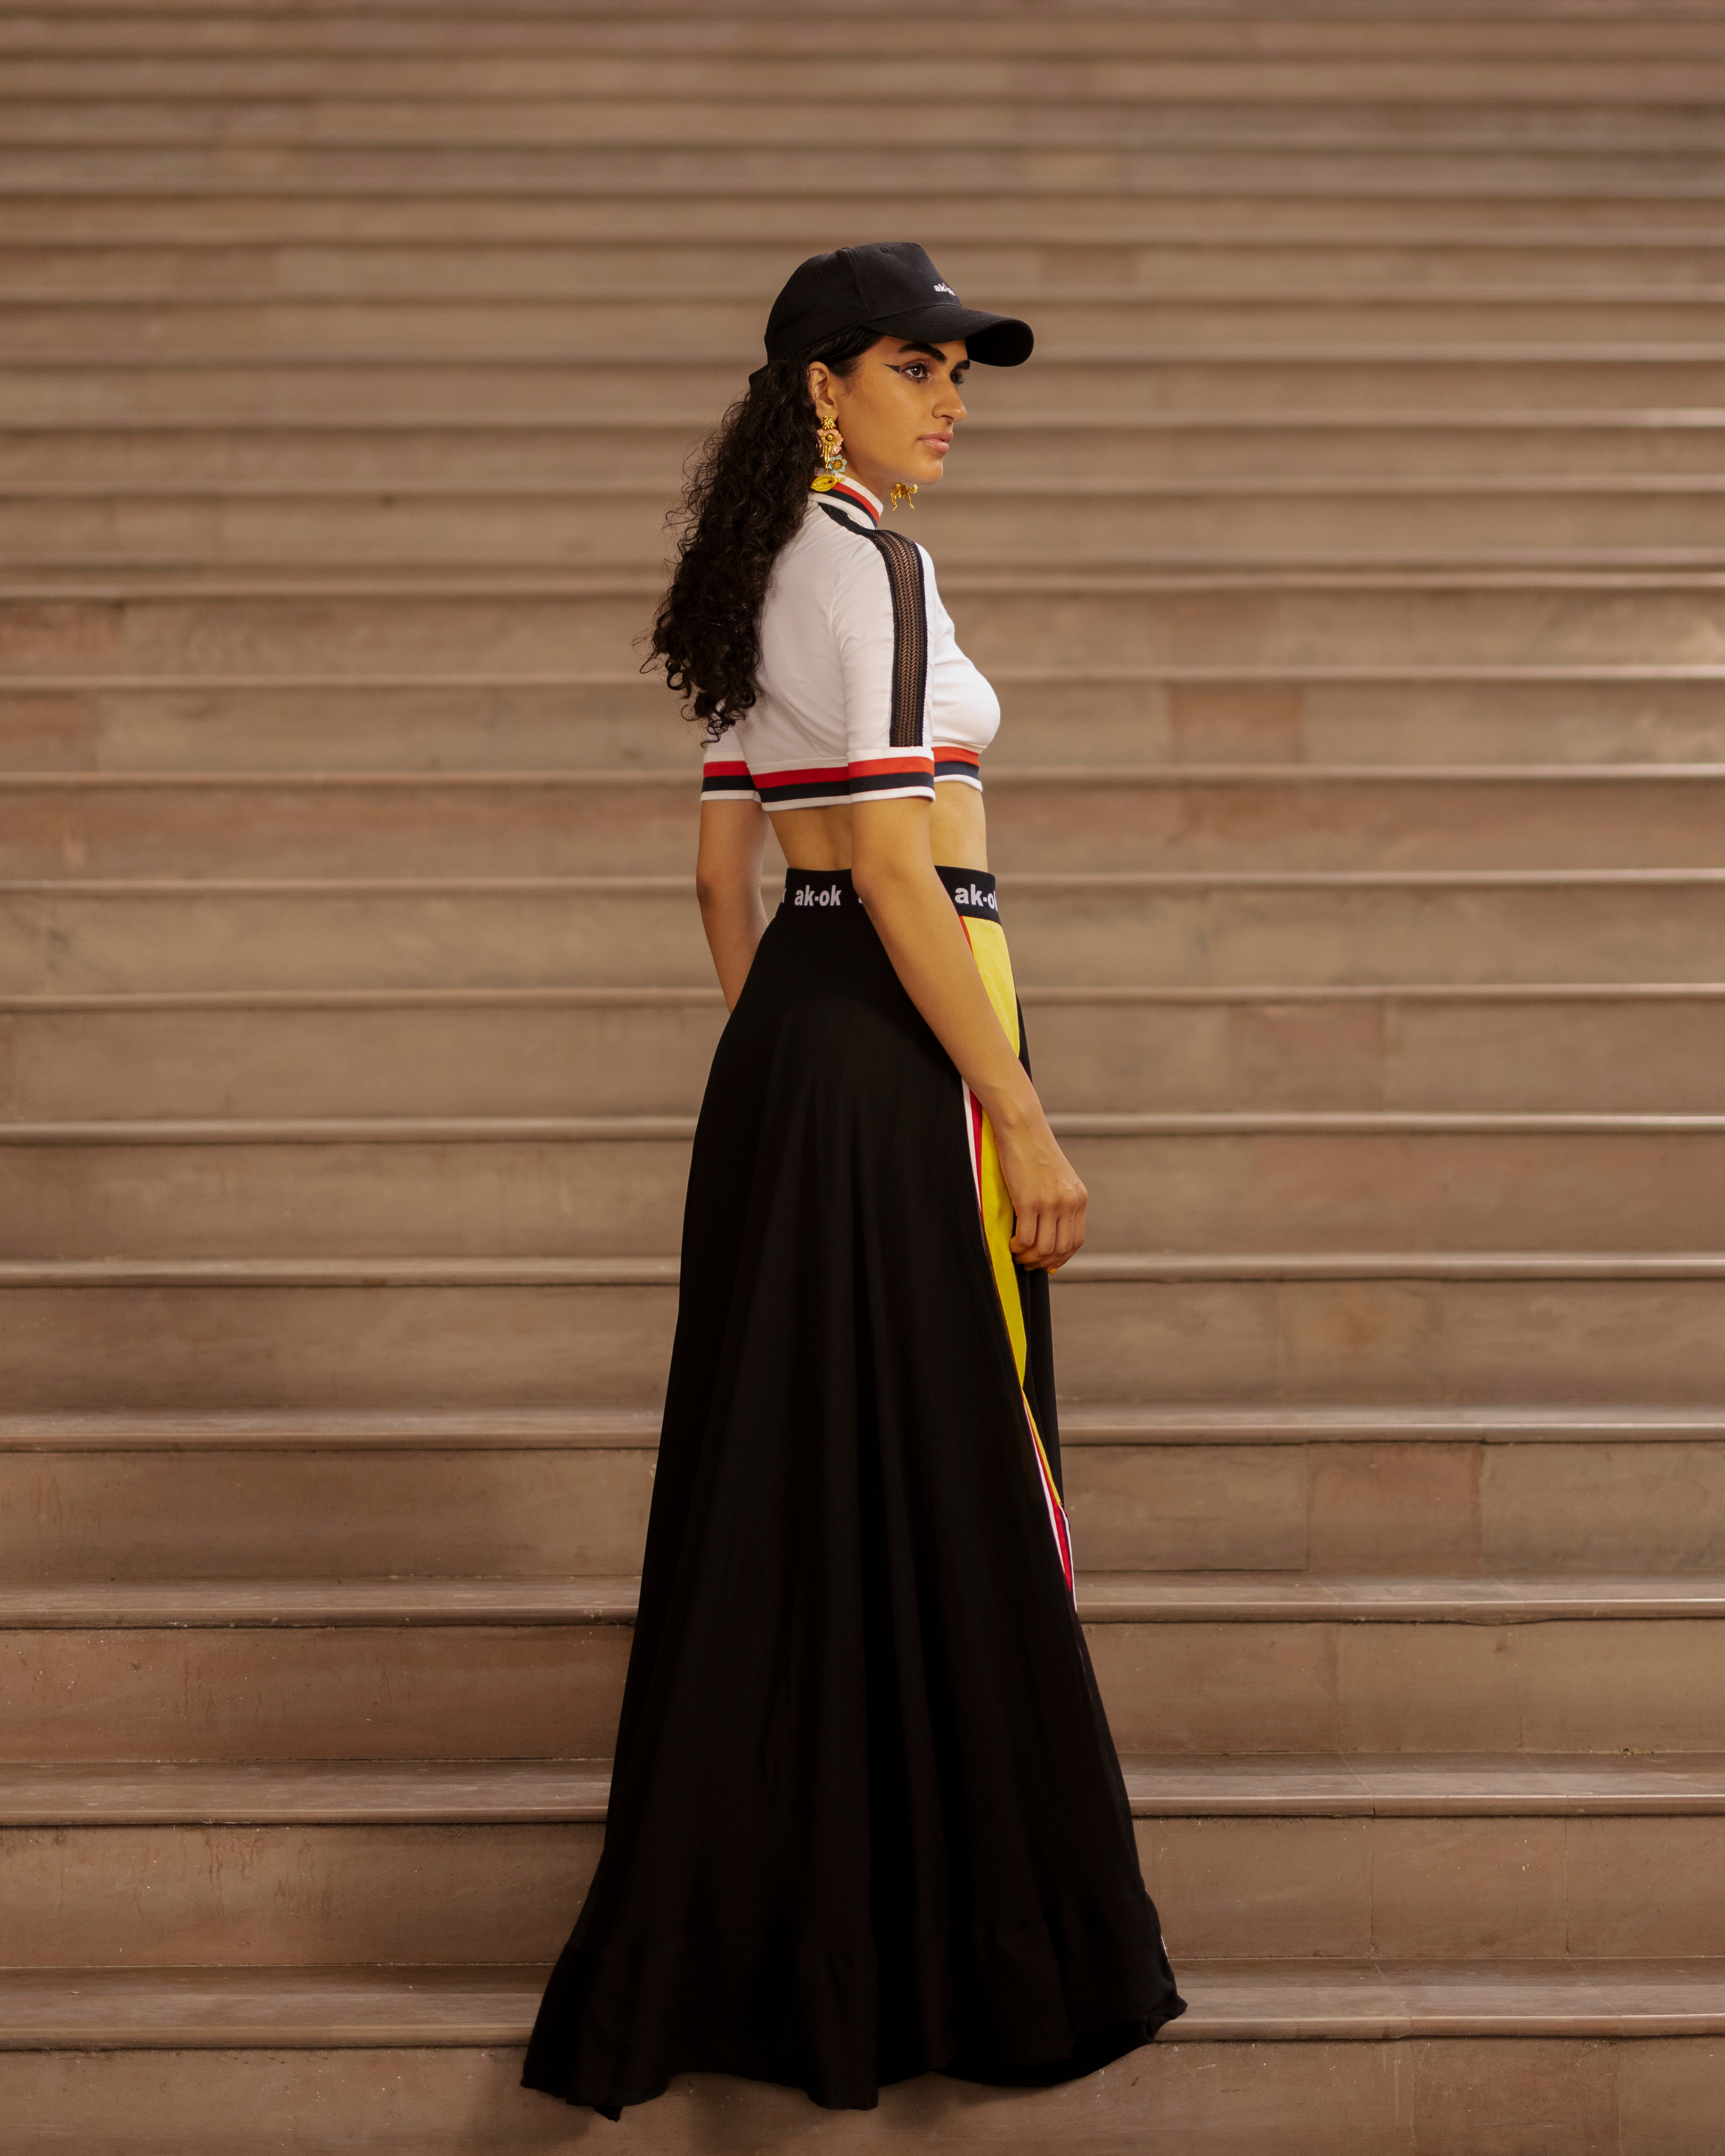 LEHENGA SKIRT AND TOP WITH SPORTY DETAIL